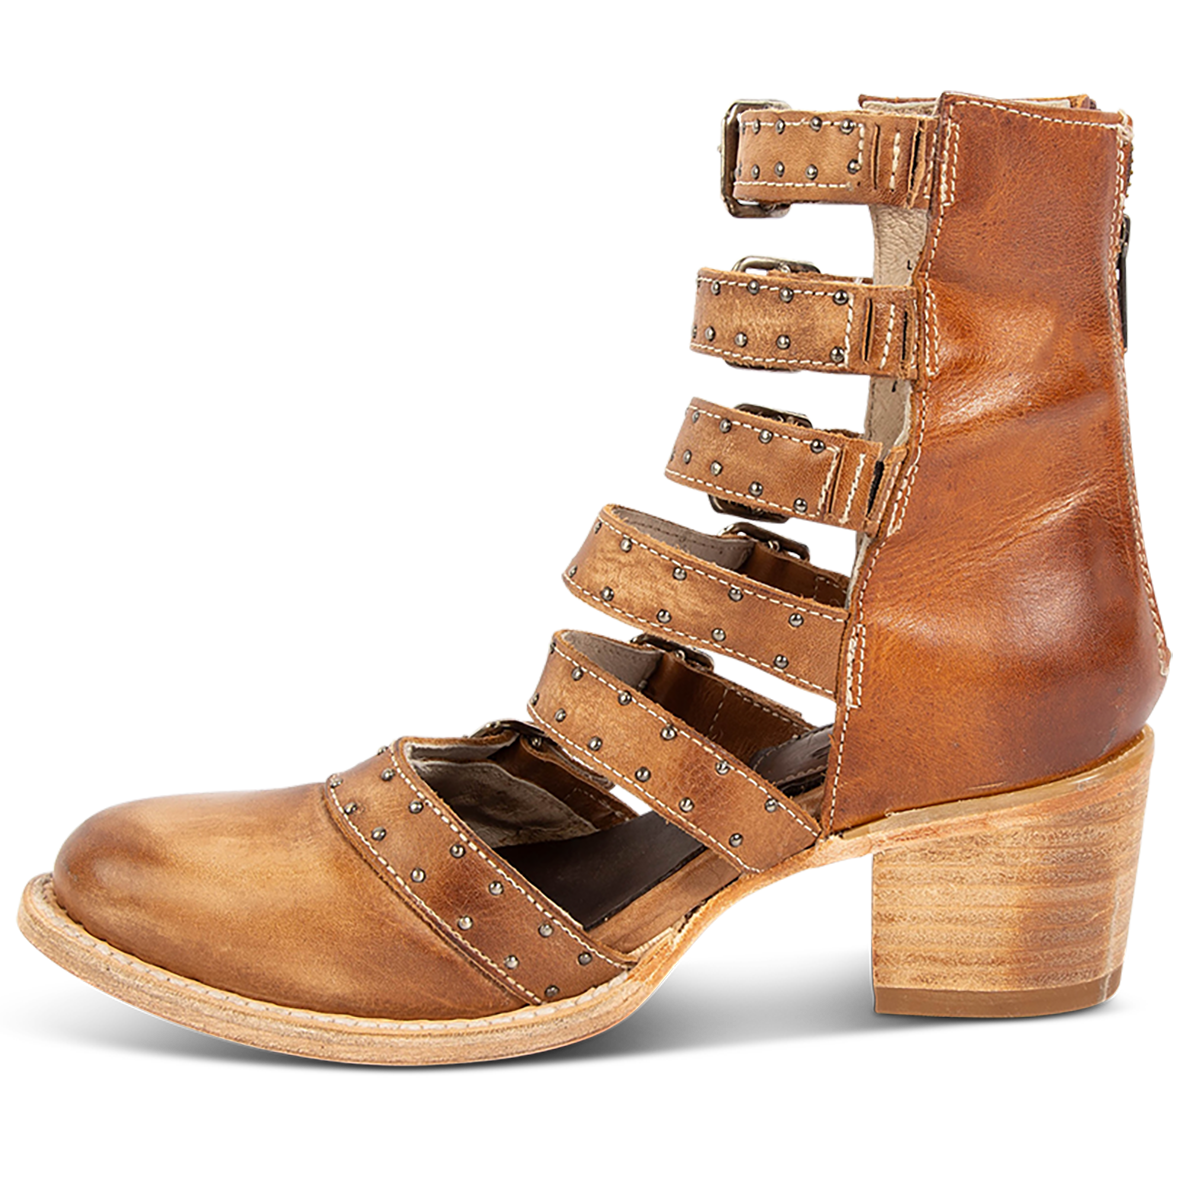 Inside view showing a stacked heel, adjustable leather straps and embellishments on FREEBIRD women's Salty wheat leather bootie